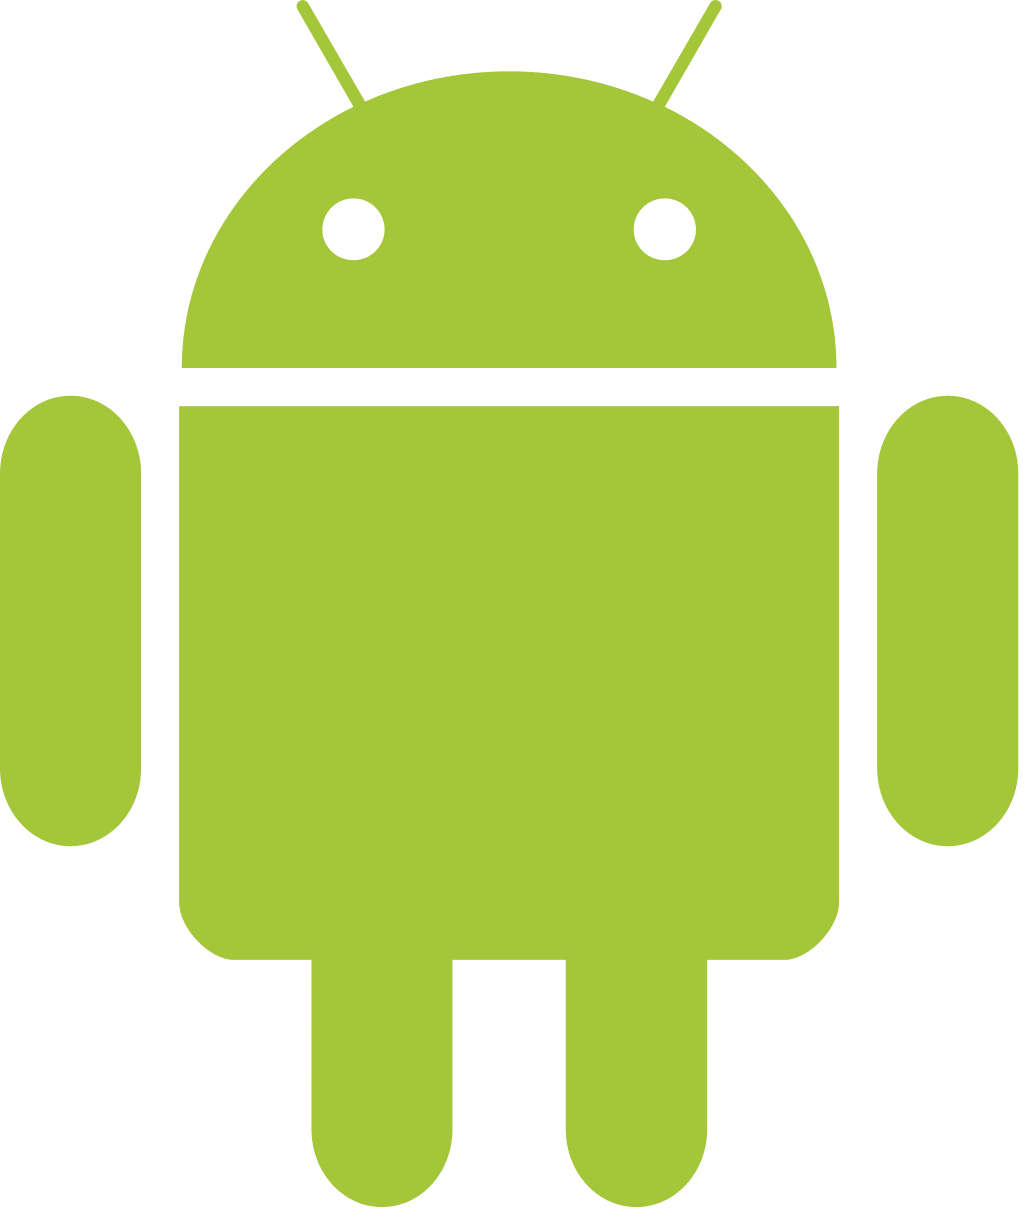 Android Roboter